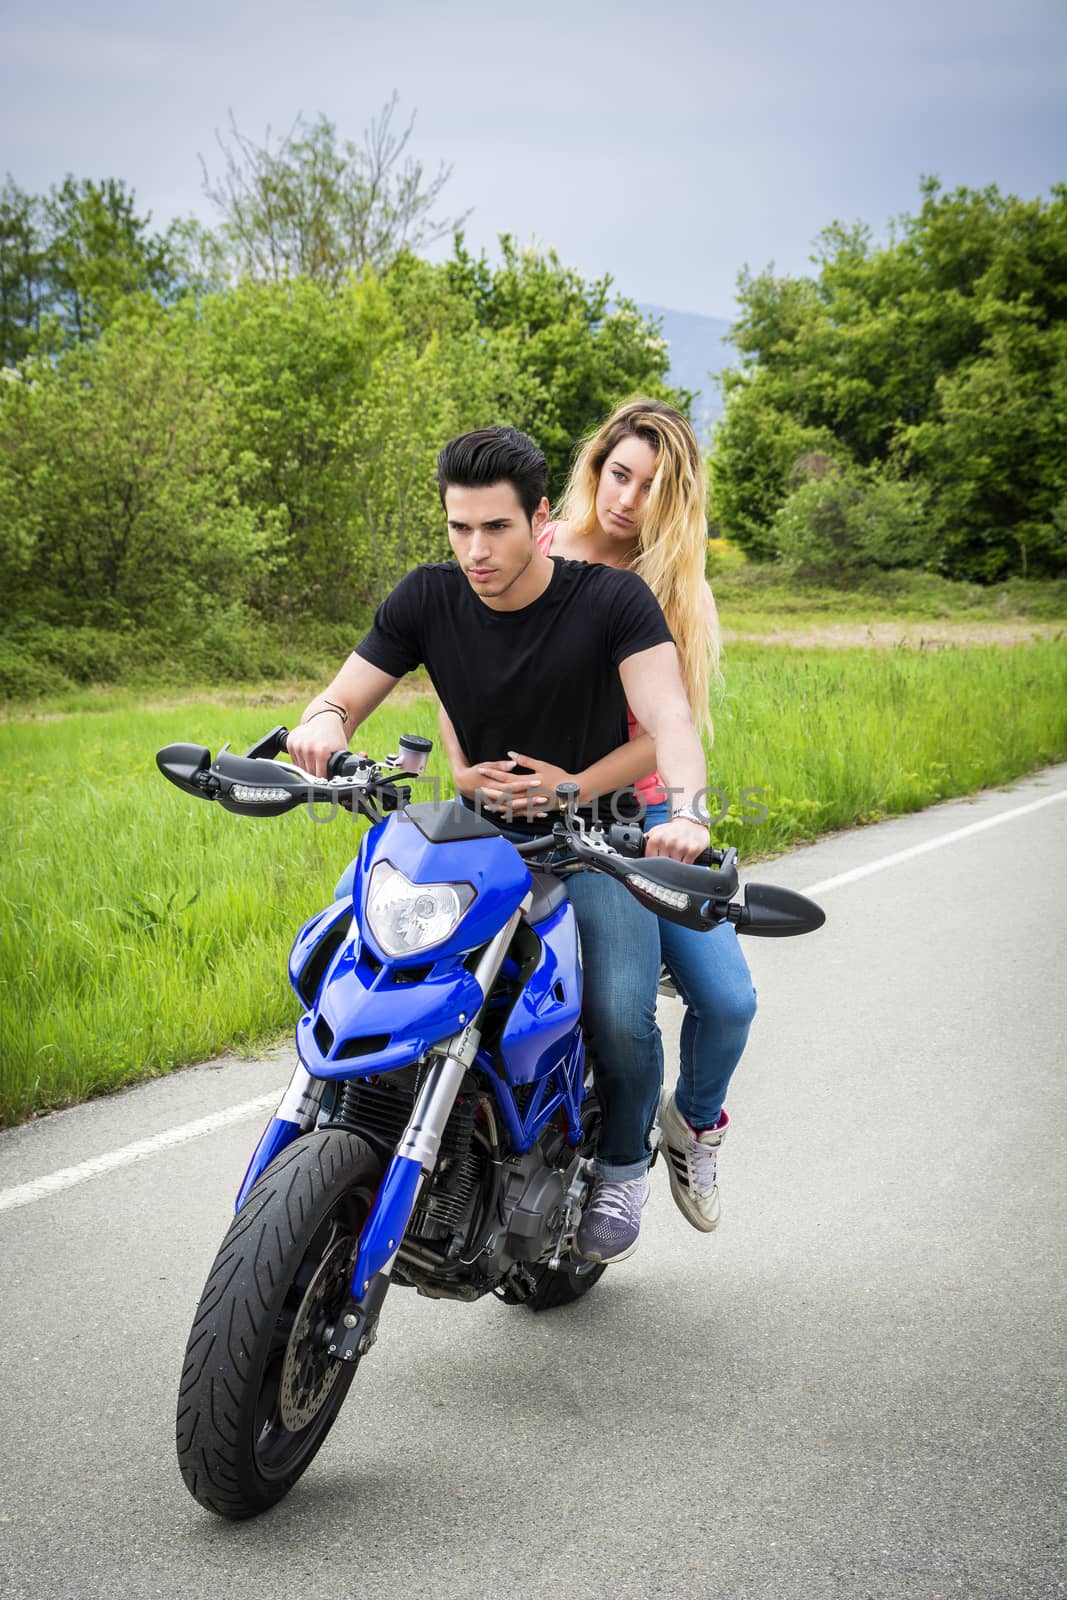 Man and woman riding motorcycle by artofphoto